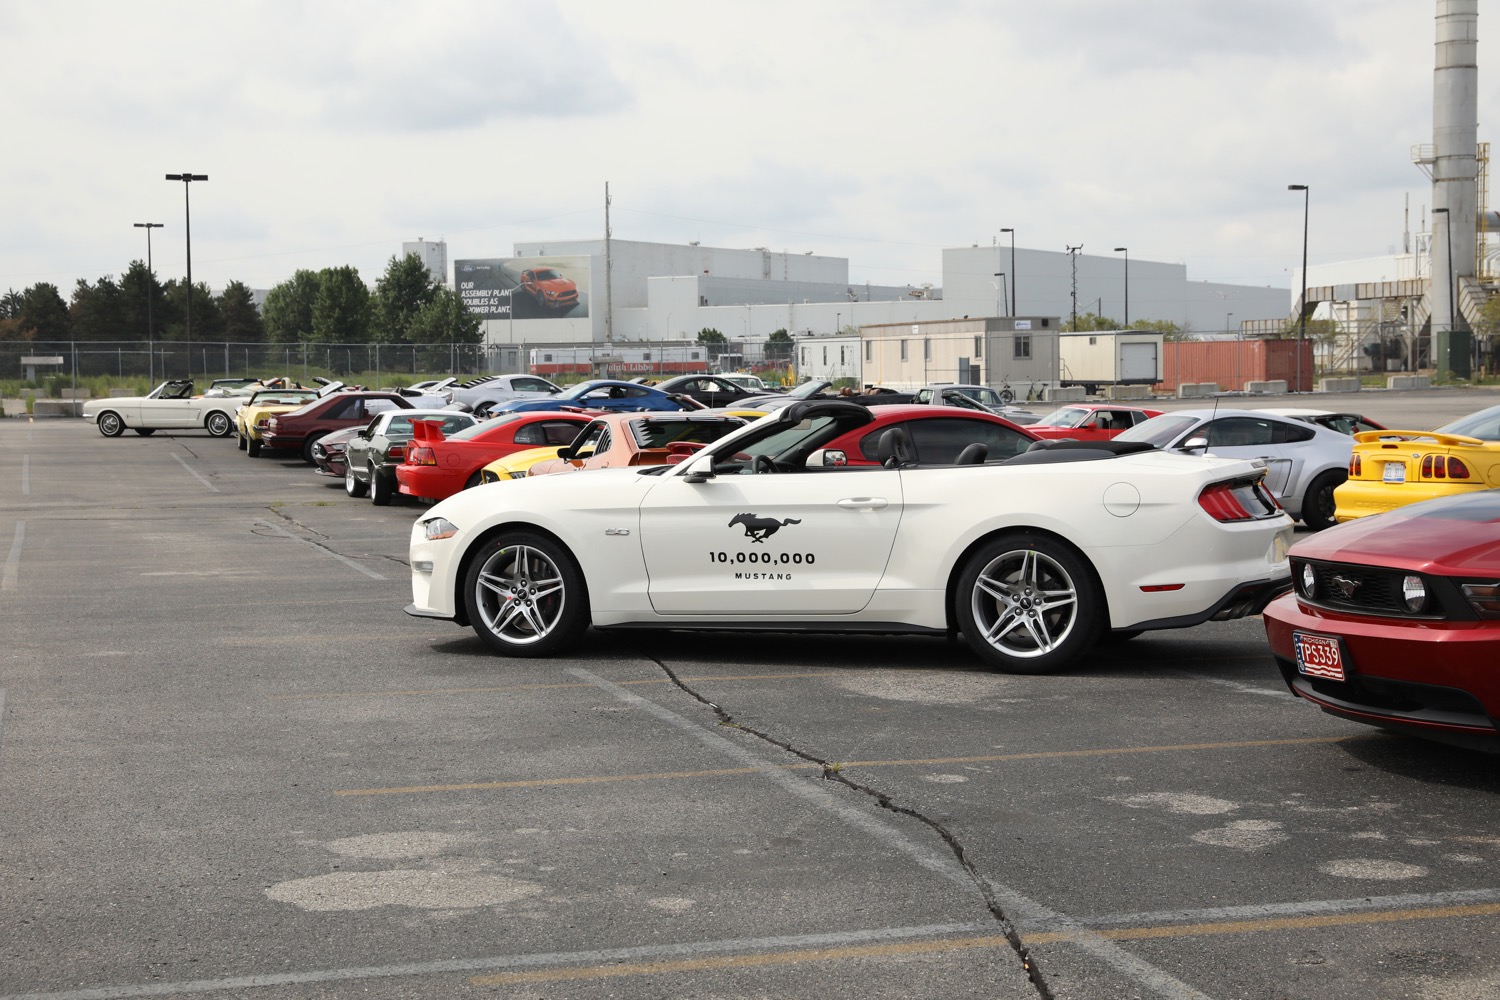 Ford builds 10 millionth Mustang